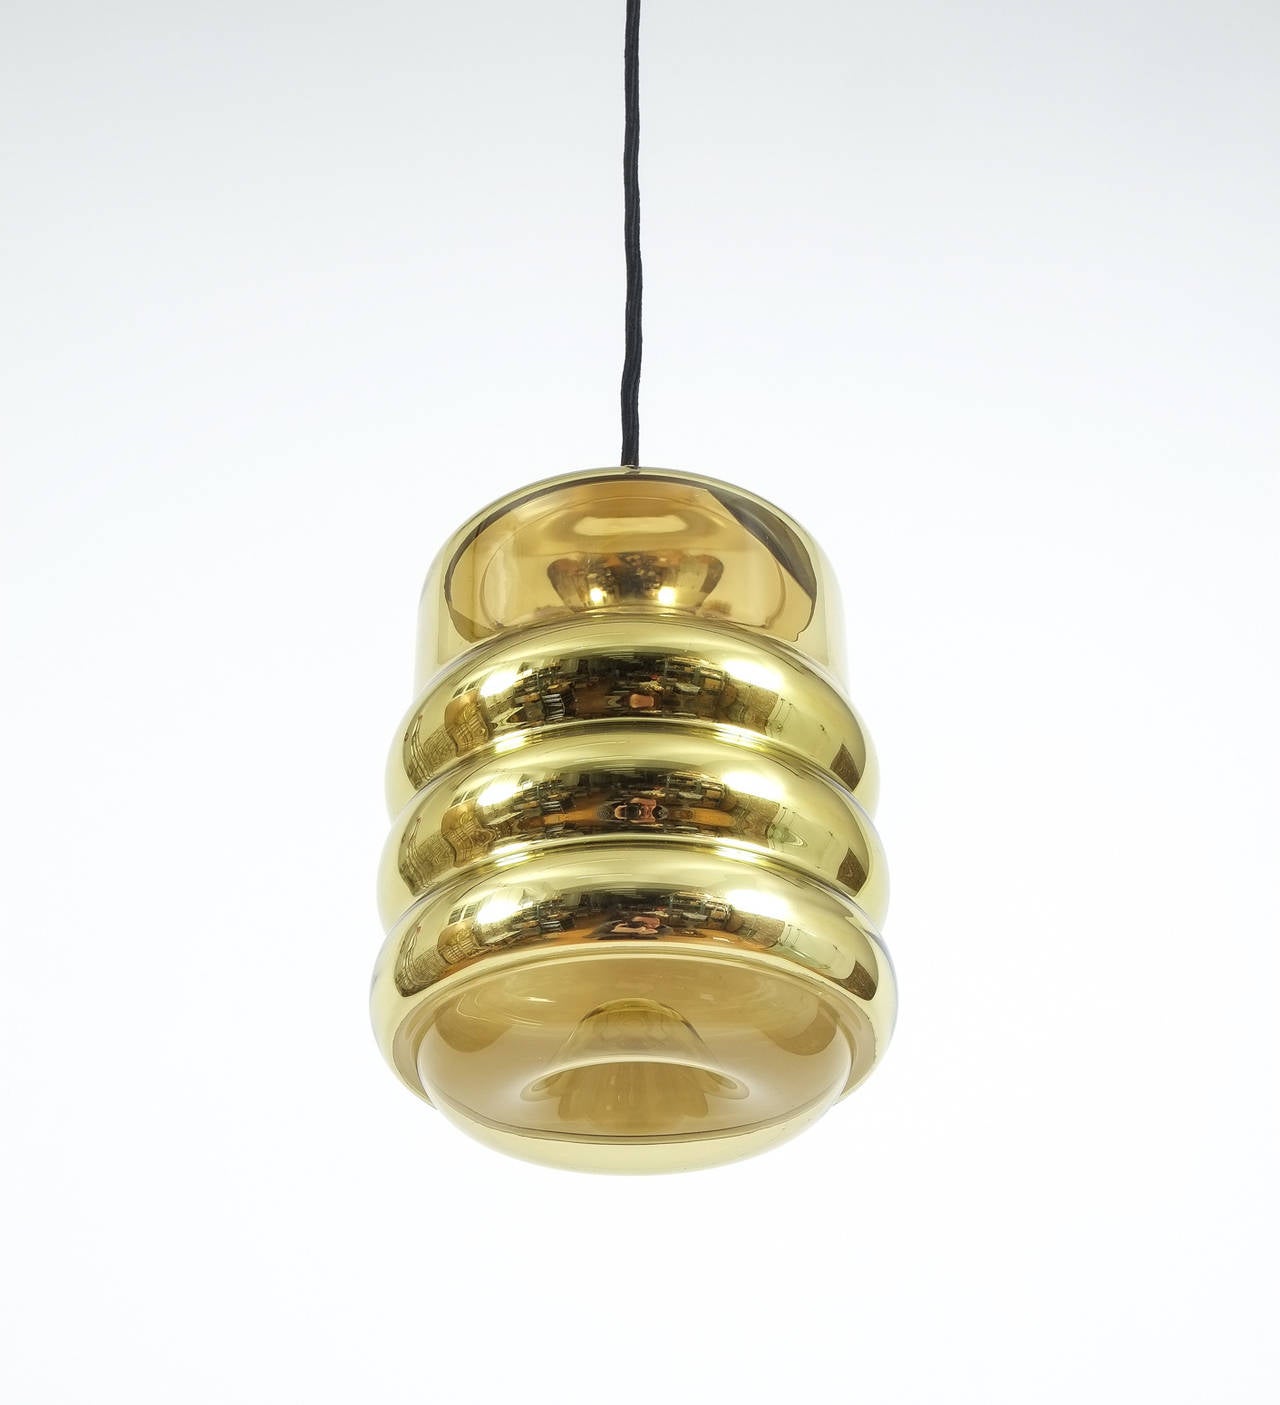 German Staff Golden Glass Pendant Lamp with Black Cord Wire, 1970